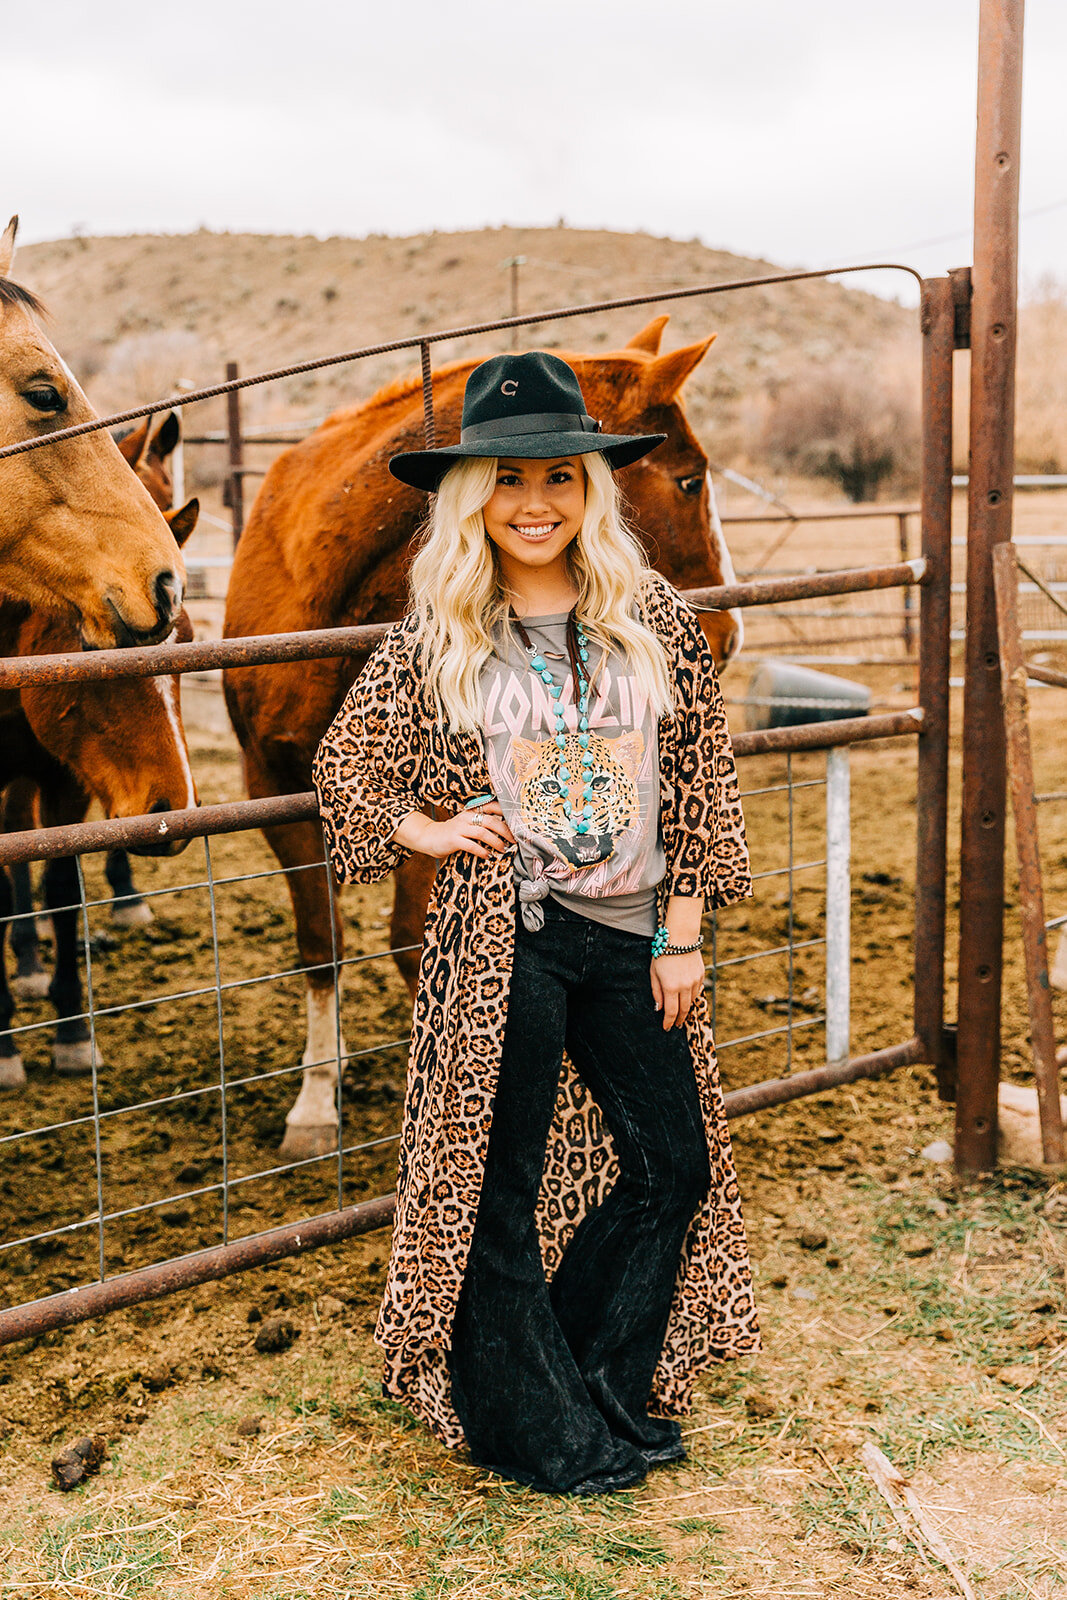  hat styling wavy hair teal earrings stones accent jewelry leopard long cardigan duster long hairstyles hair and makeup inspiration country style professional photographers in utah commercial photographers in utah horses wild rag boutique commercial 